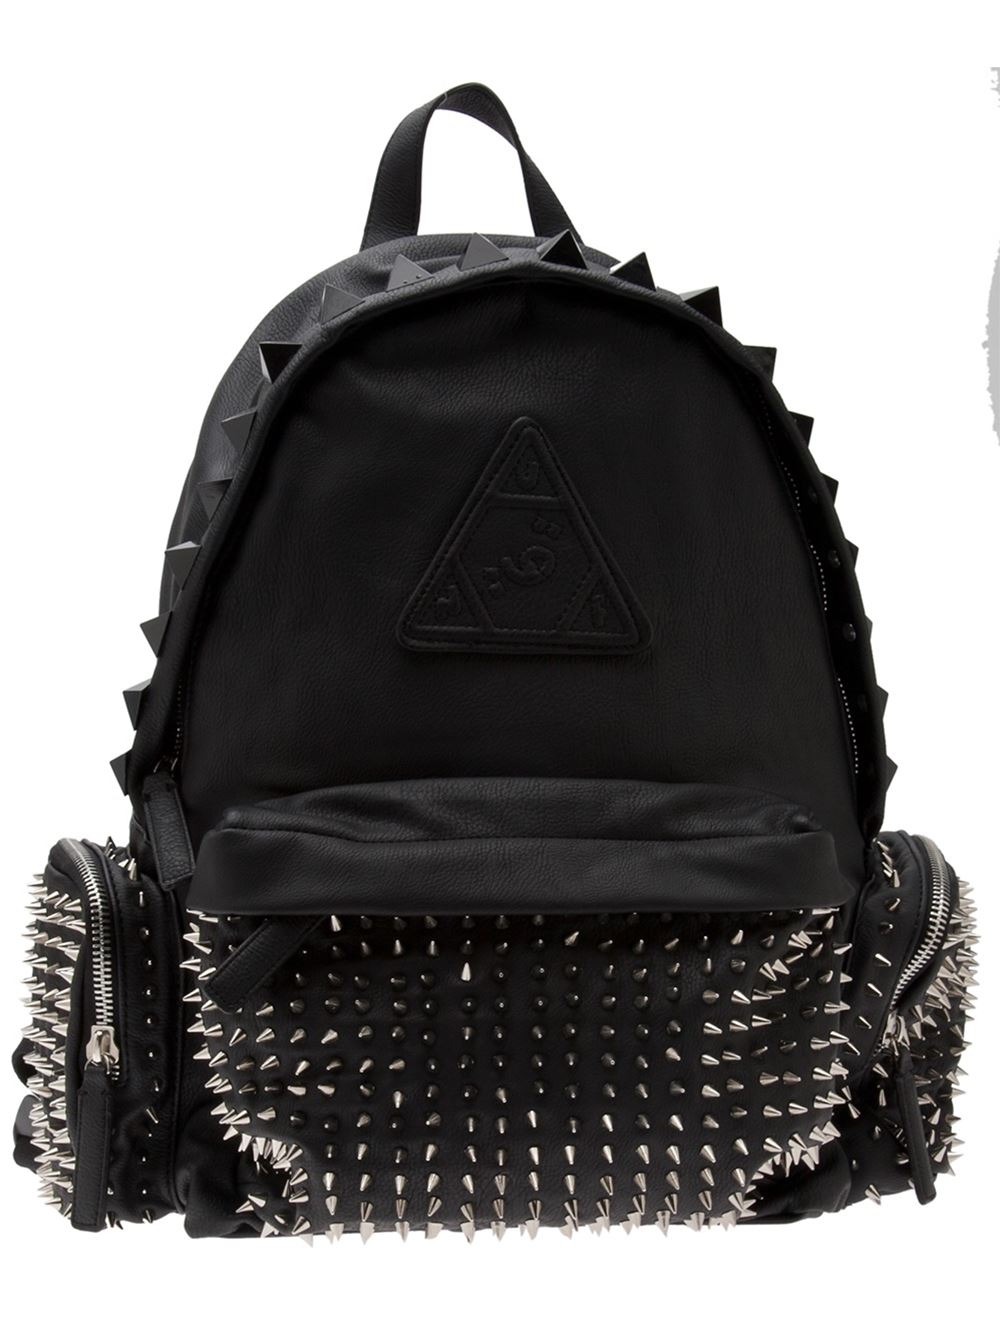 Spiked backpack